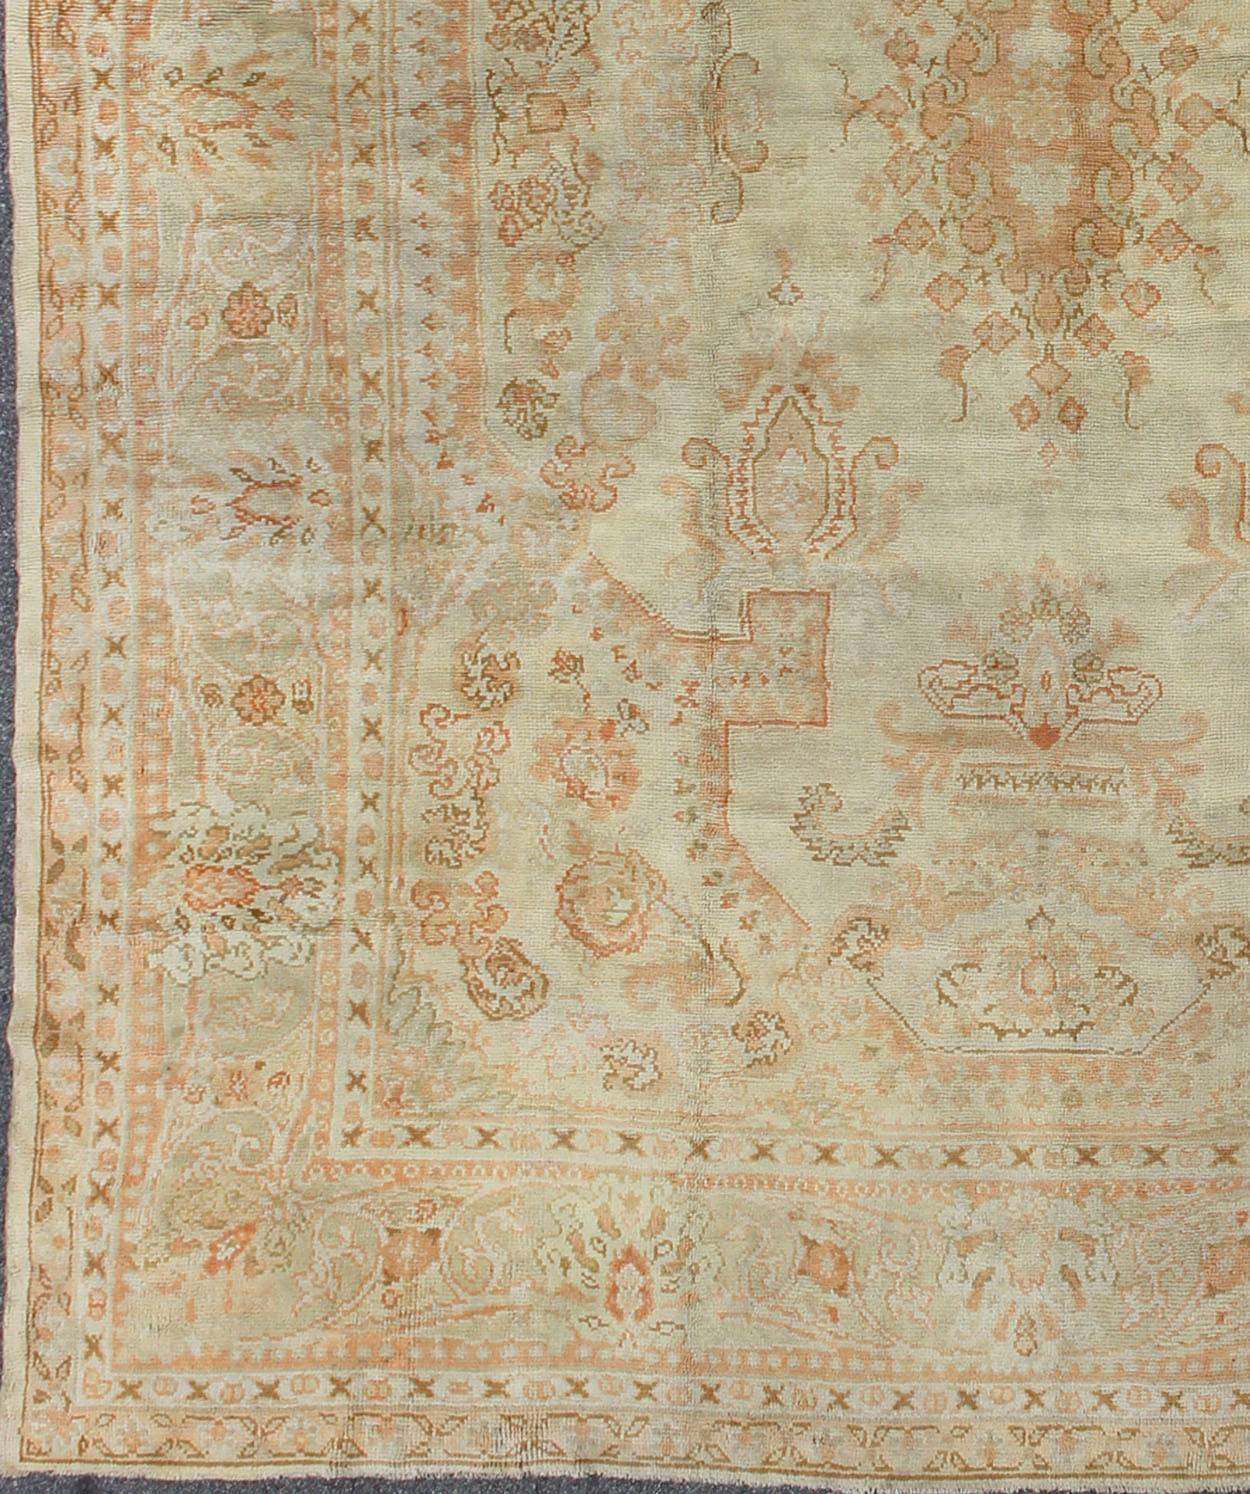 Large Antique Oushak Carpet in Ivory Background, Taupe, Gray , Green and Salmon.
This remarkable antique Oushak displays an elegant design and a fabulous, soft color palette. The intricate border is a subtle gray-green, and the background is neutral